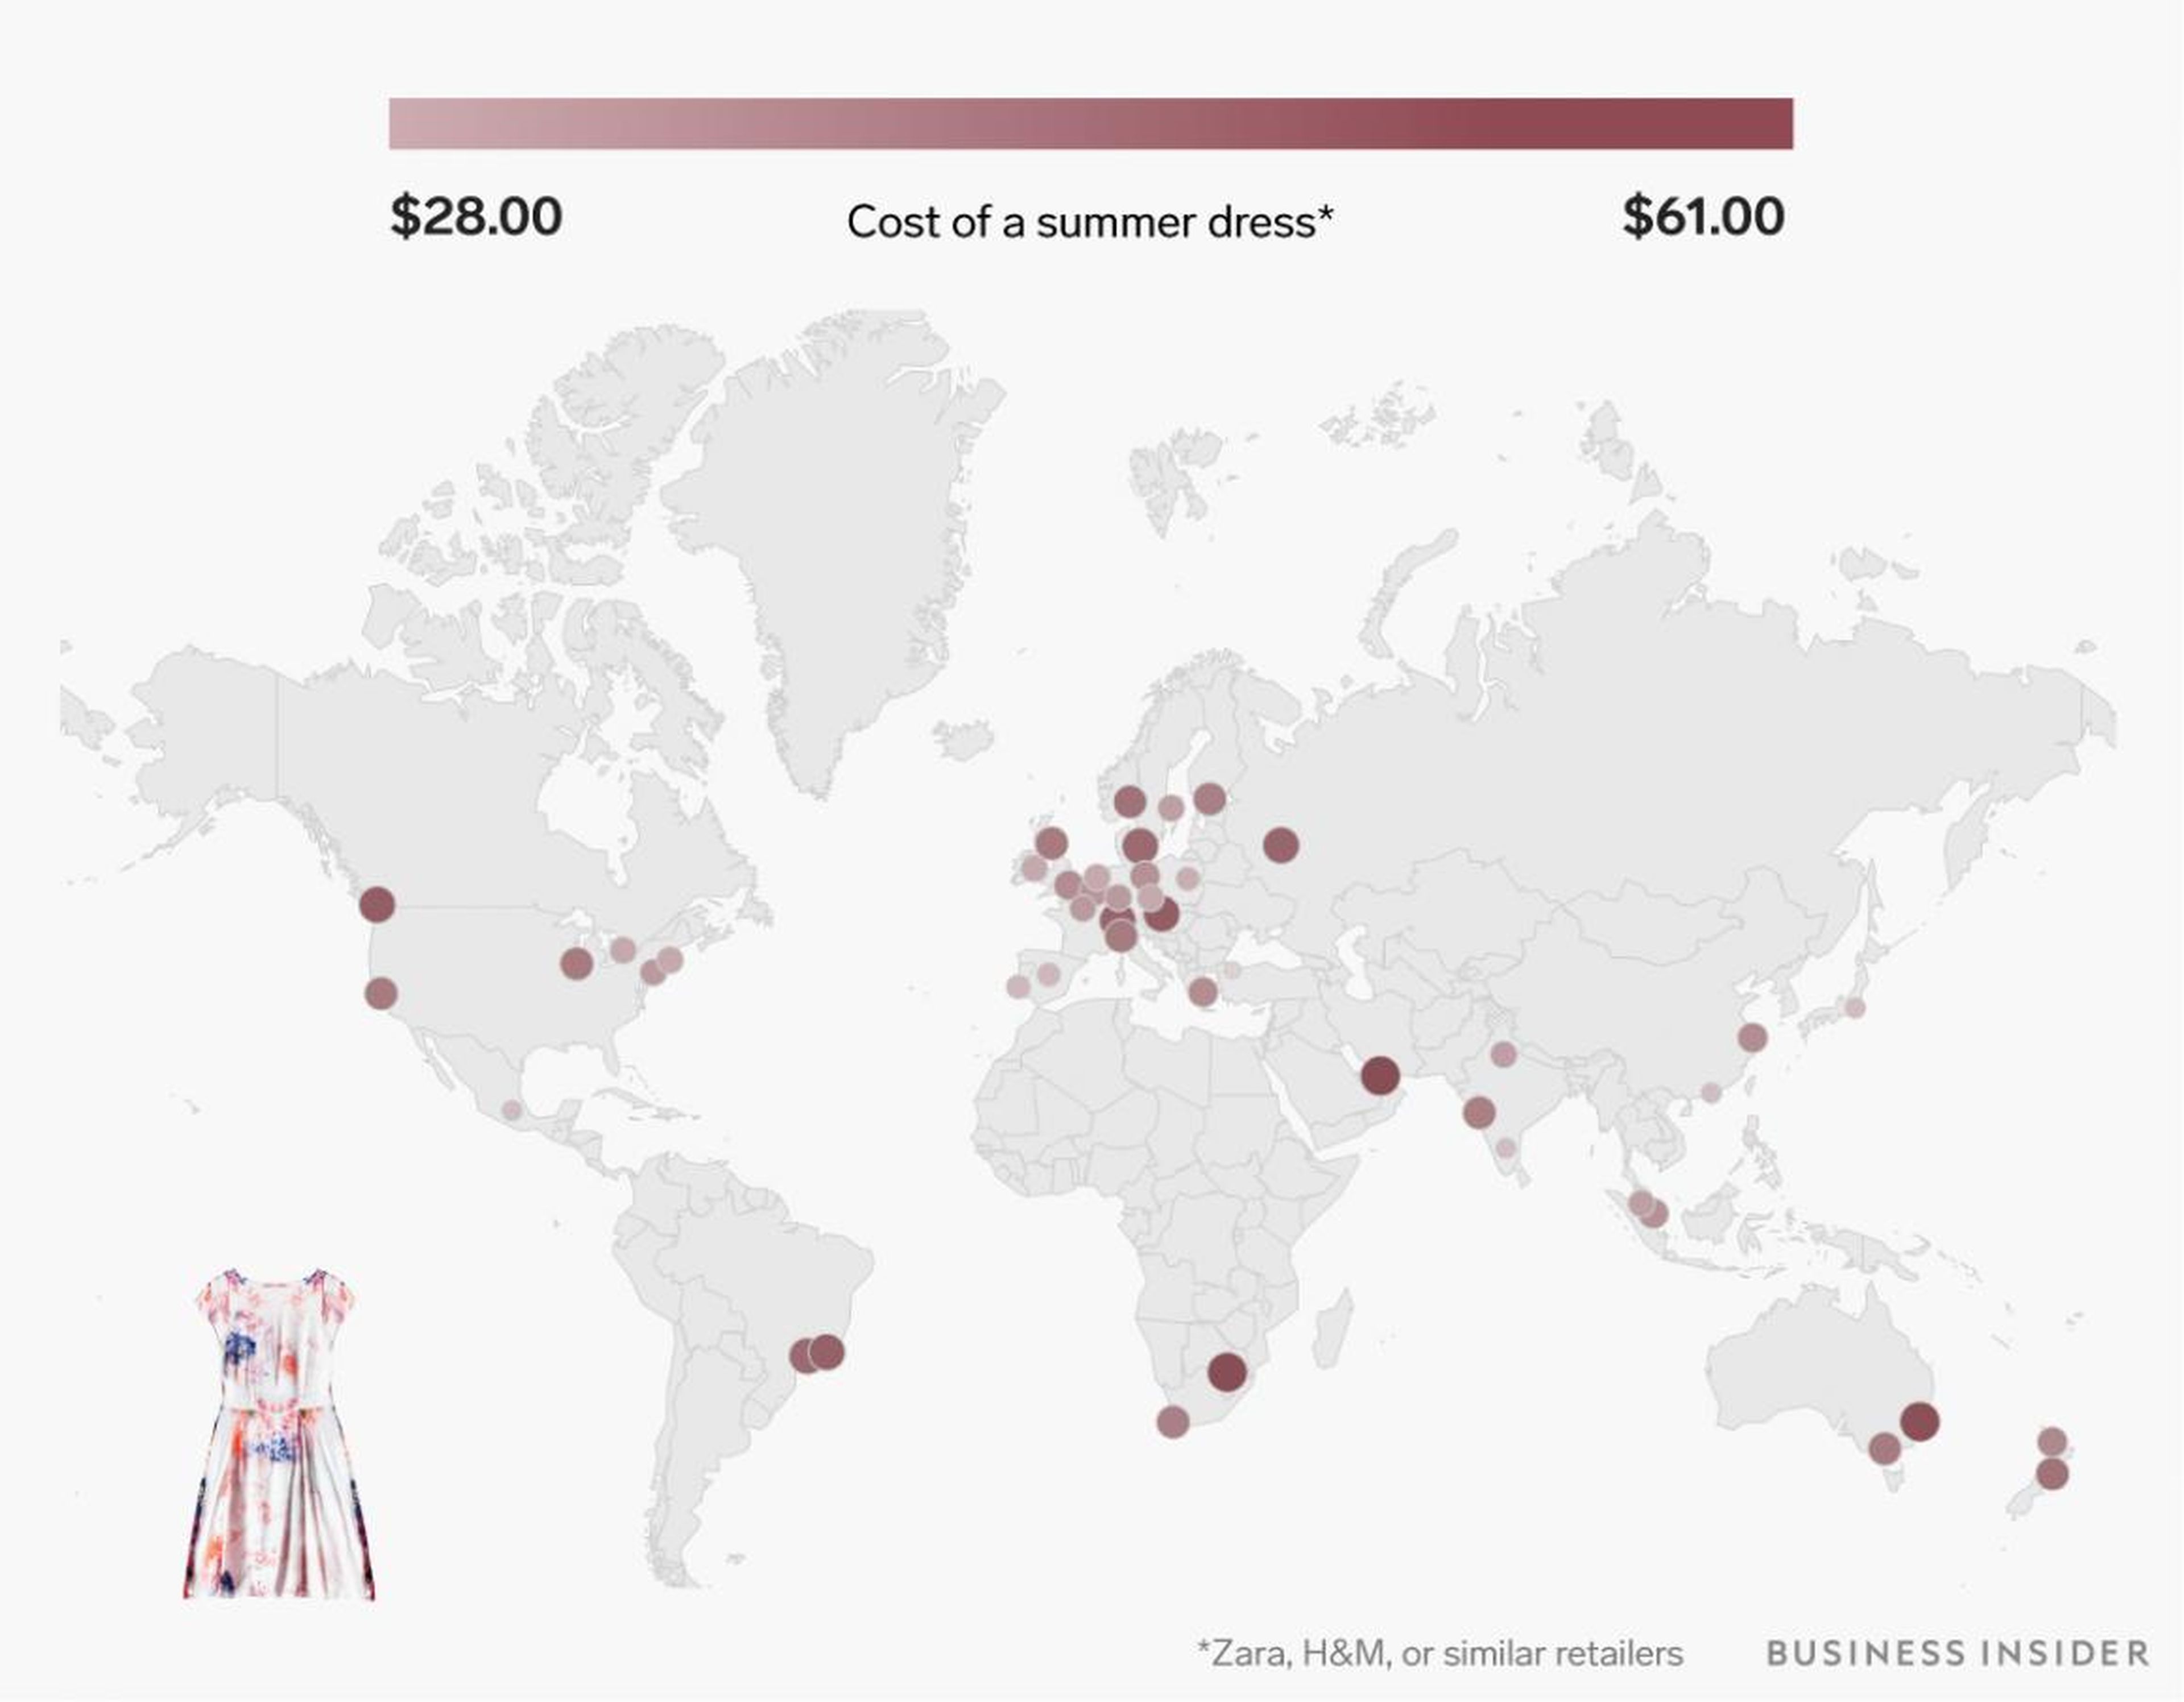 A summer dress from Zara, H&M, or a similar store ranges from $28 to $61.